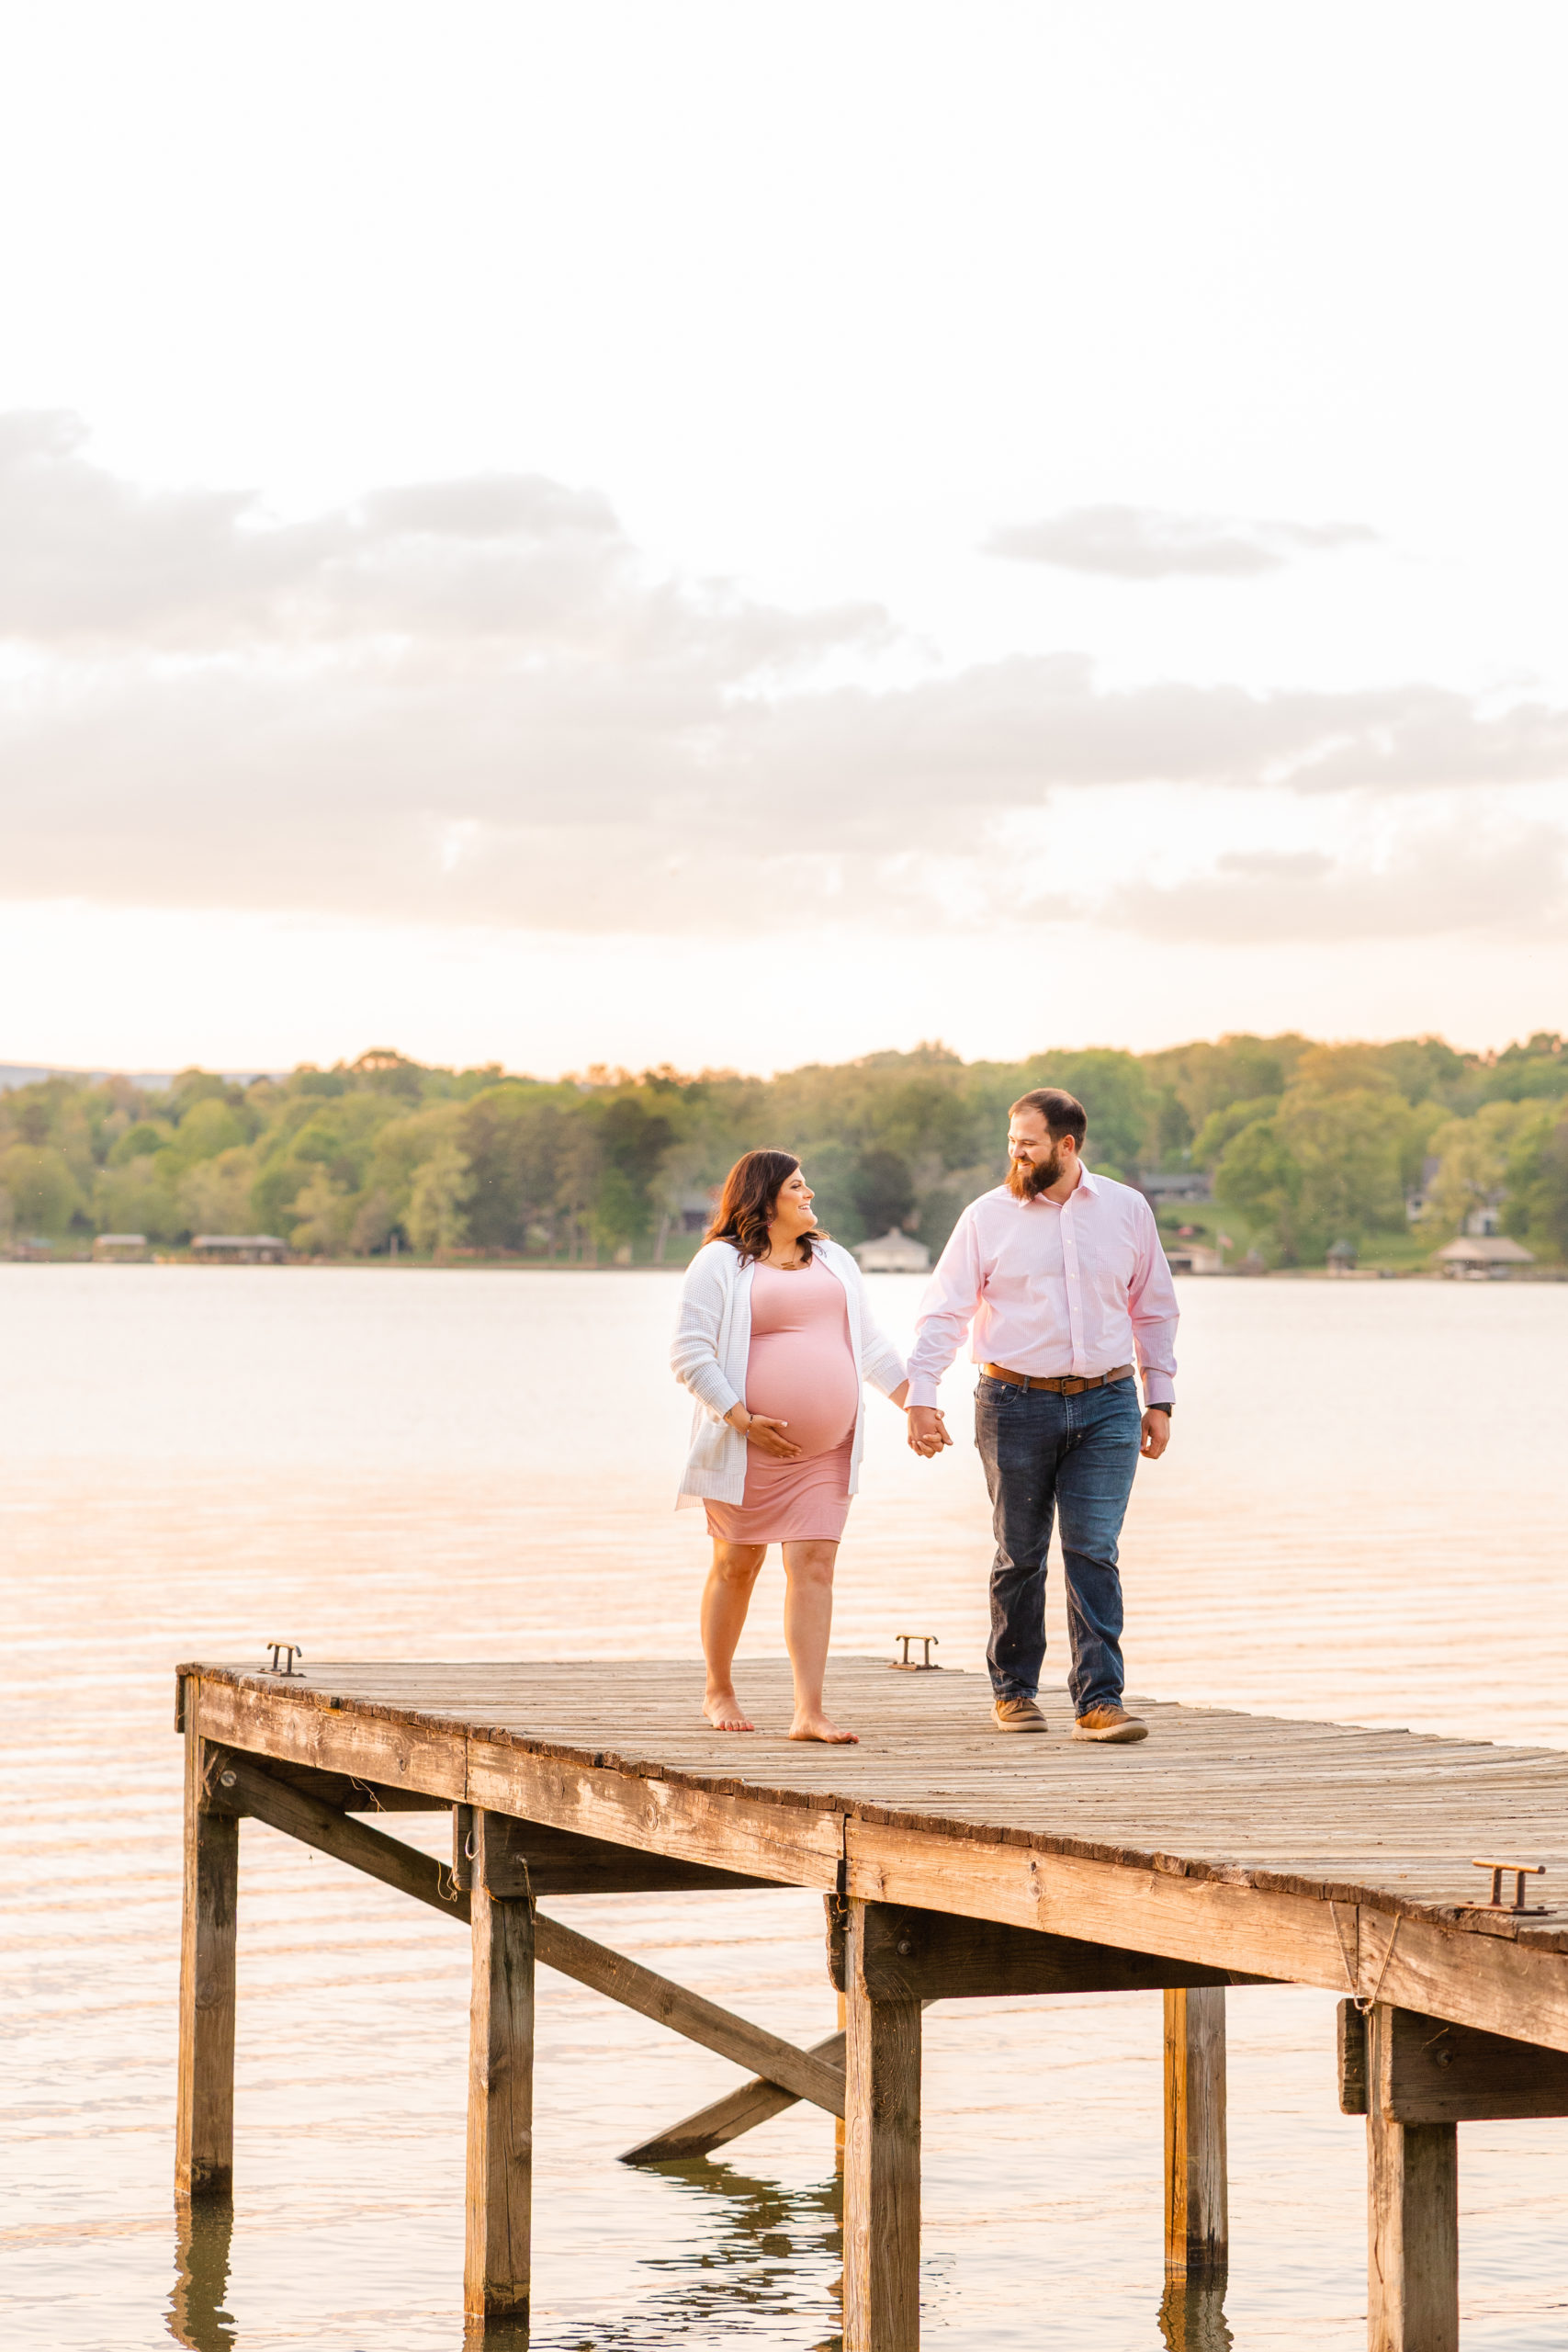 Chattanooga Maternity Pictures; Bright and vibrant Chattanooga TN maternity photo shoot at Chester Frost lake location on dock.